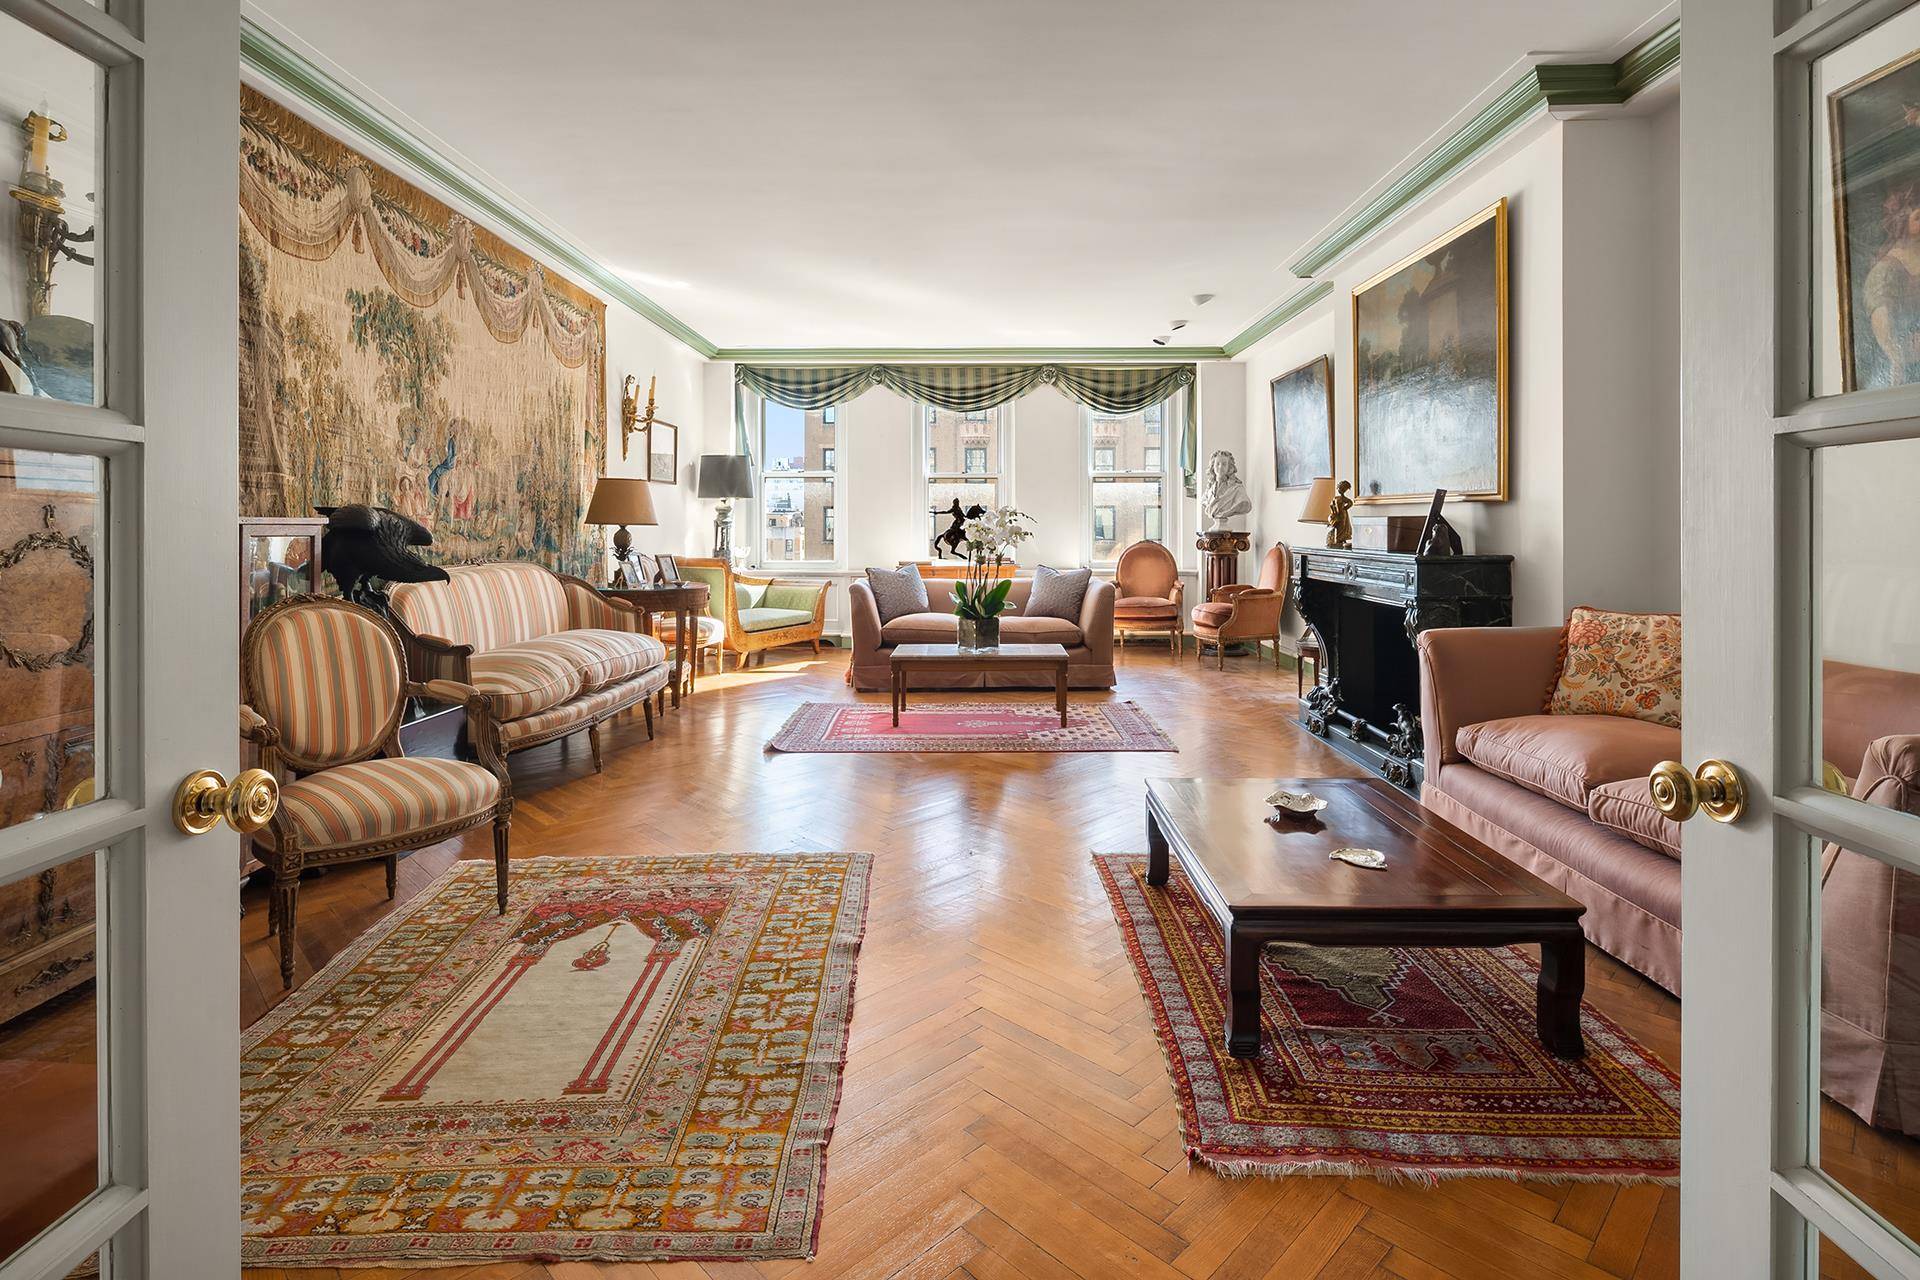 24 Hour Notice Required for ShowingsSophisticated Pre War Duplex Boasting Charm and Bright ExposuresA A This high floor home welcomes you through a semi private elevator vestibule into the gracious ...